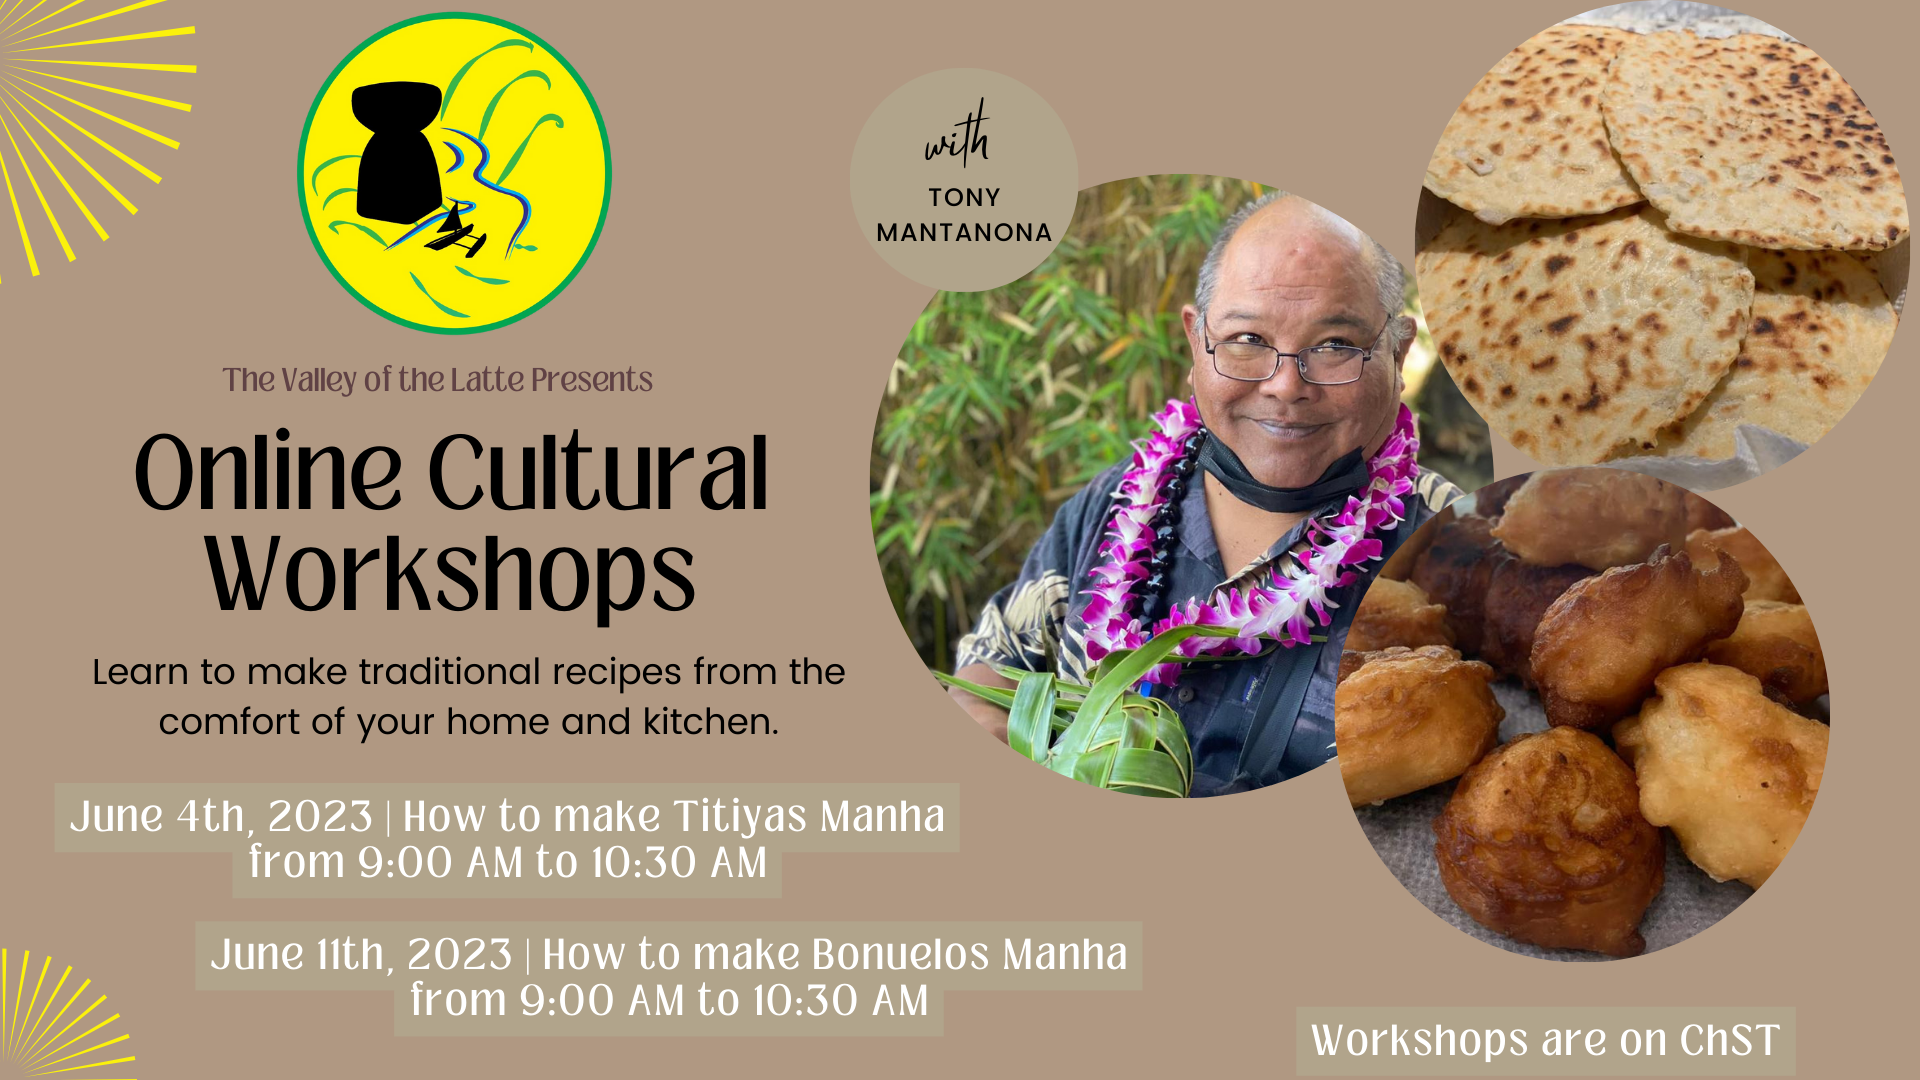 Online Cultural Workshops with Tony Mantanona